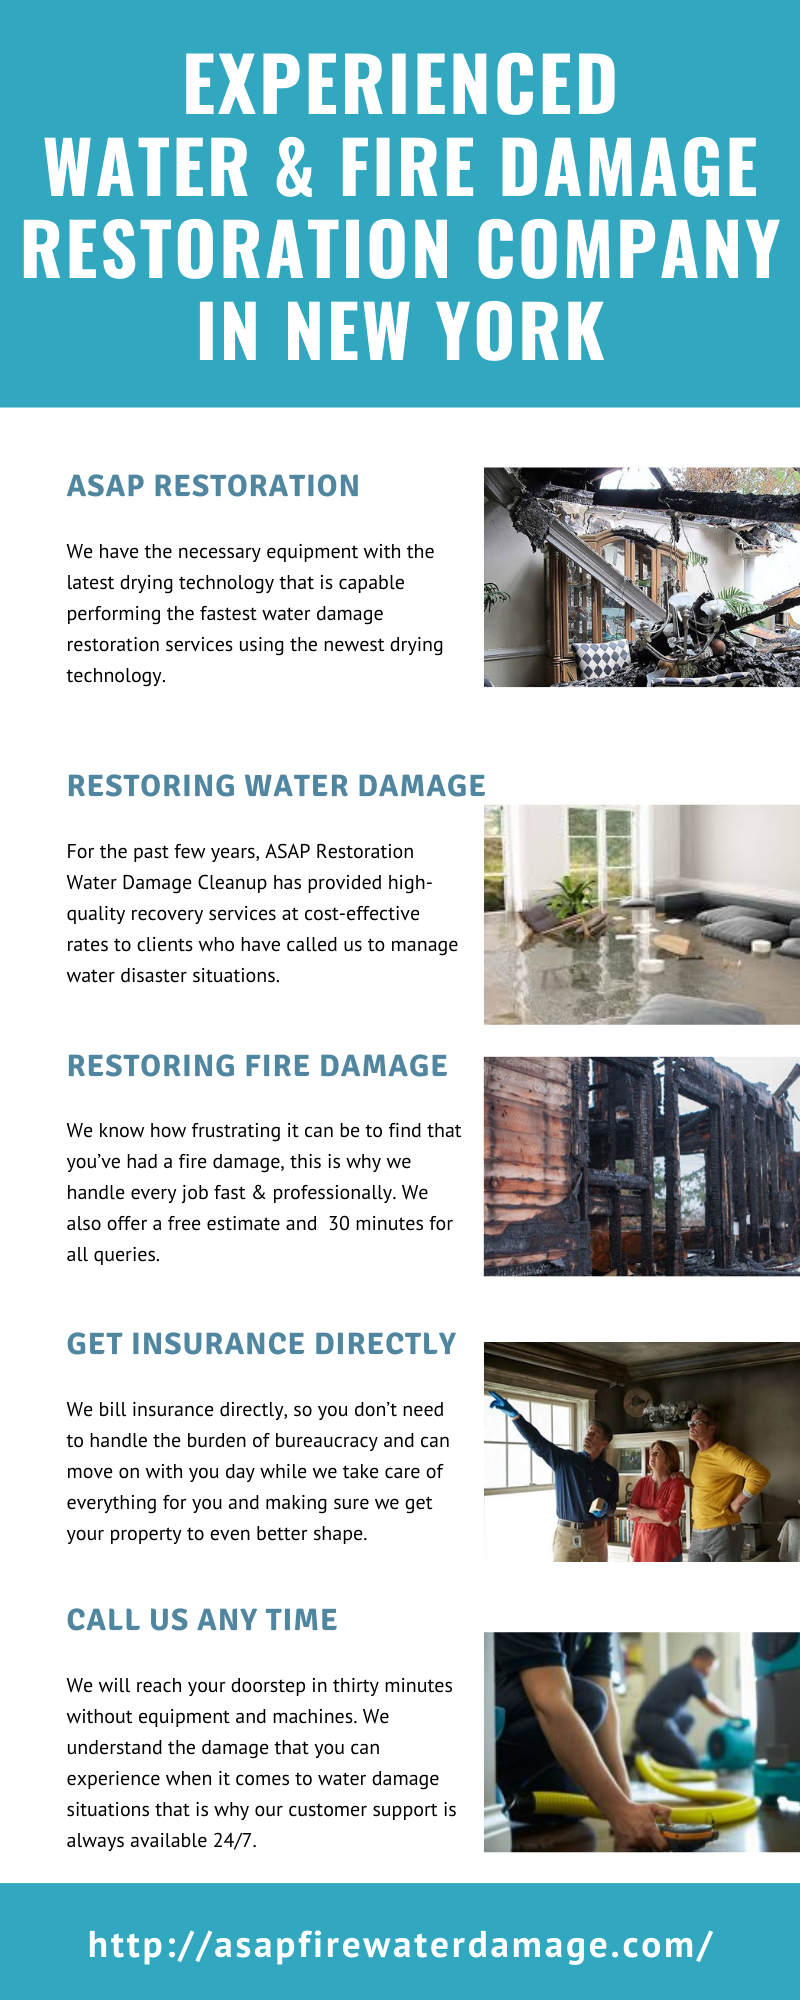 Experienced Water & Fire damage Restoration Company in New York